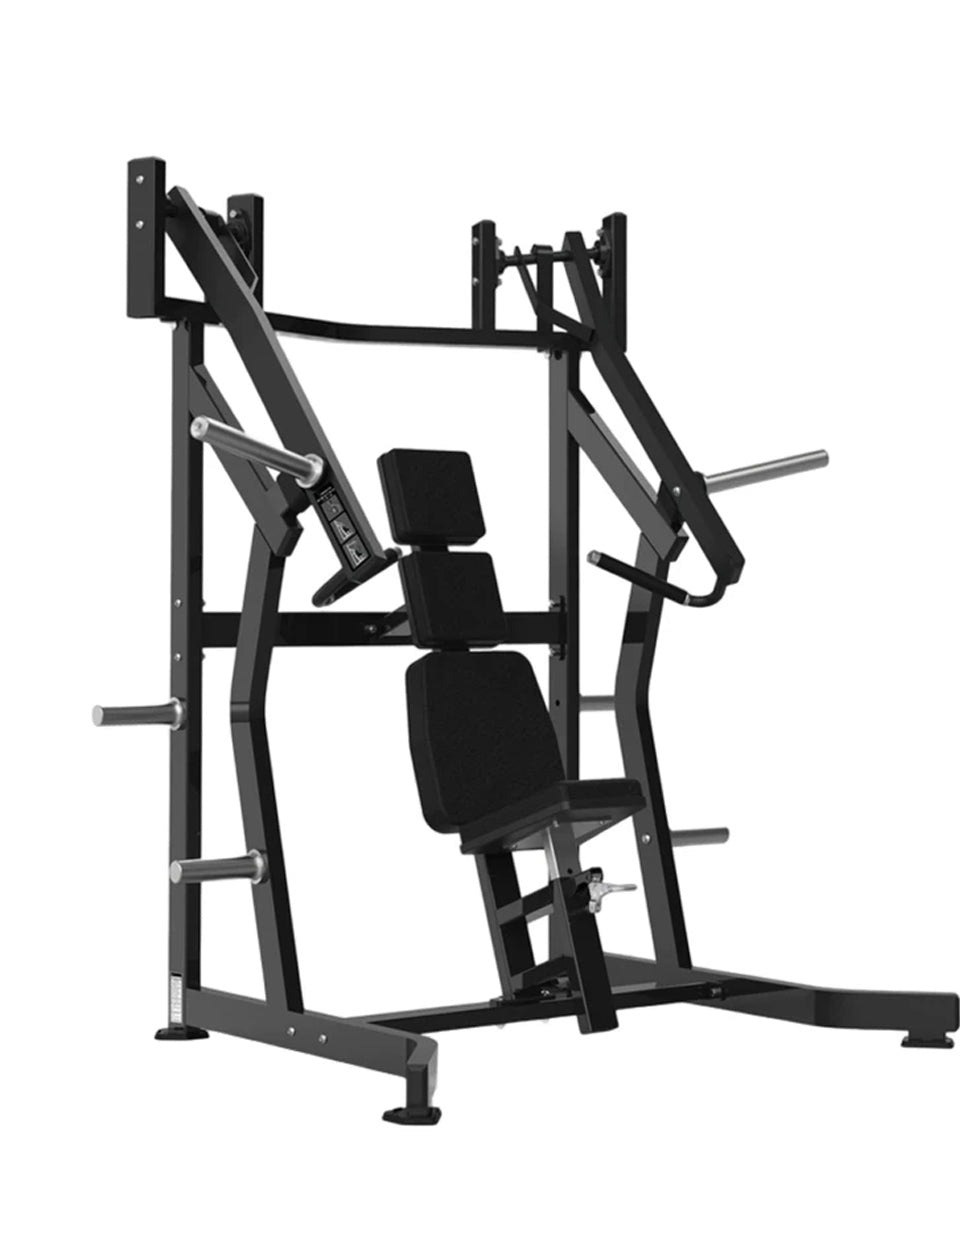 Strength machine for chest press